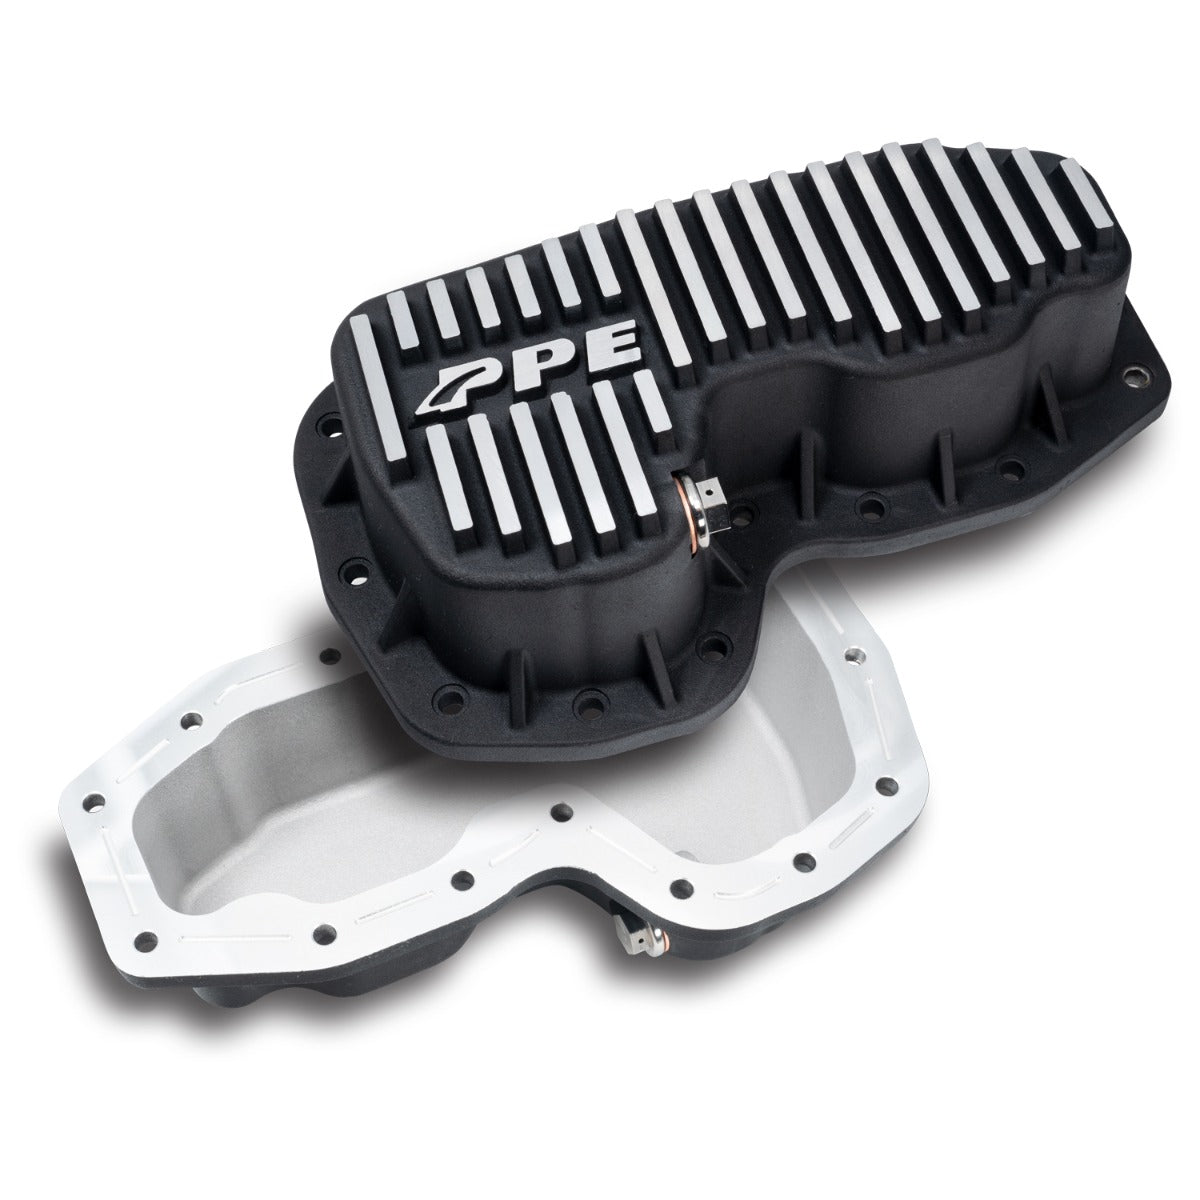 2011-2022 Jeep Grand Cherokee 3.6L Heavy-Duty Cast Aluminum Engine Oil Pan ppepower